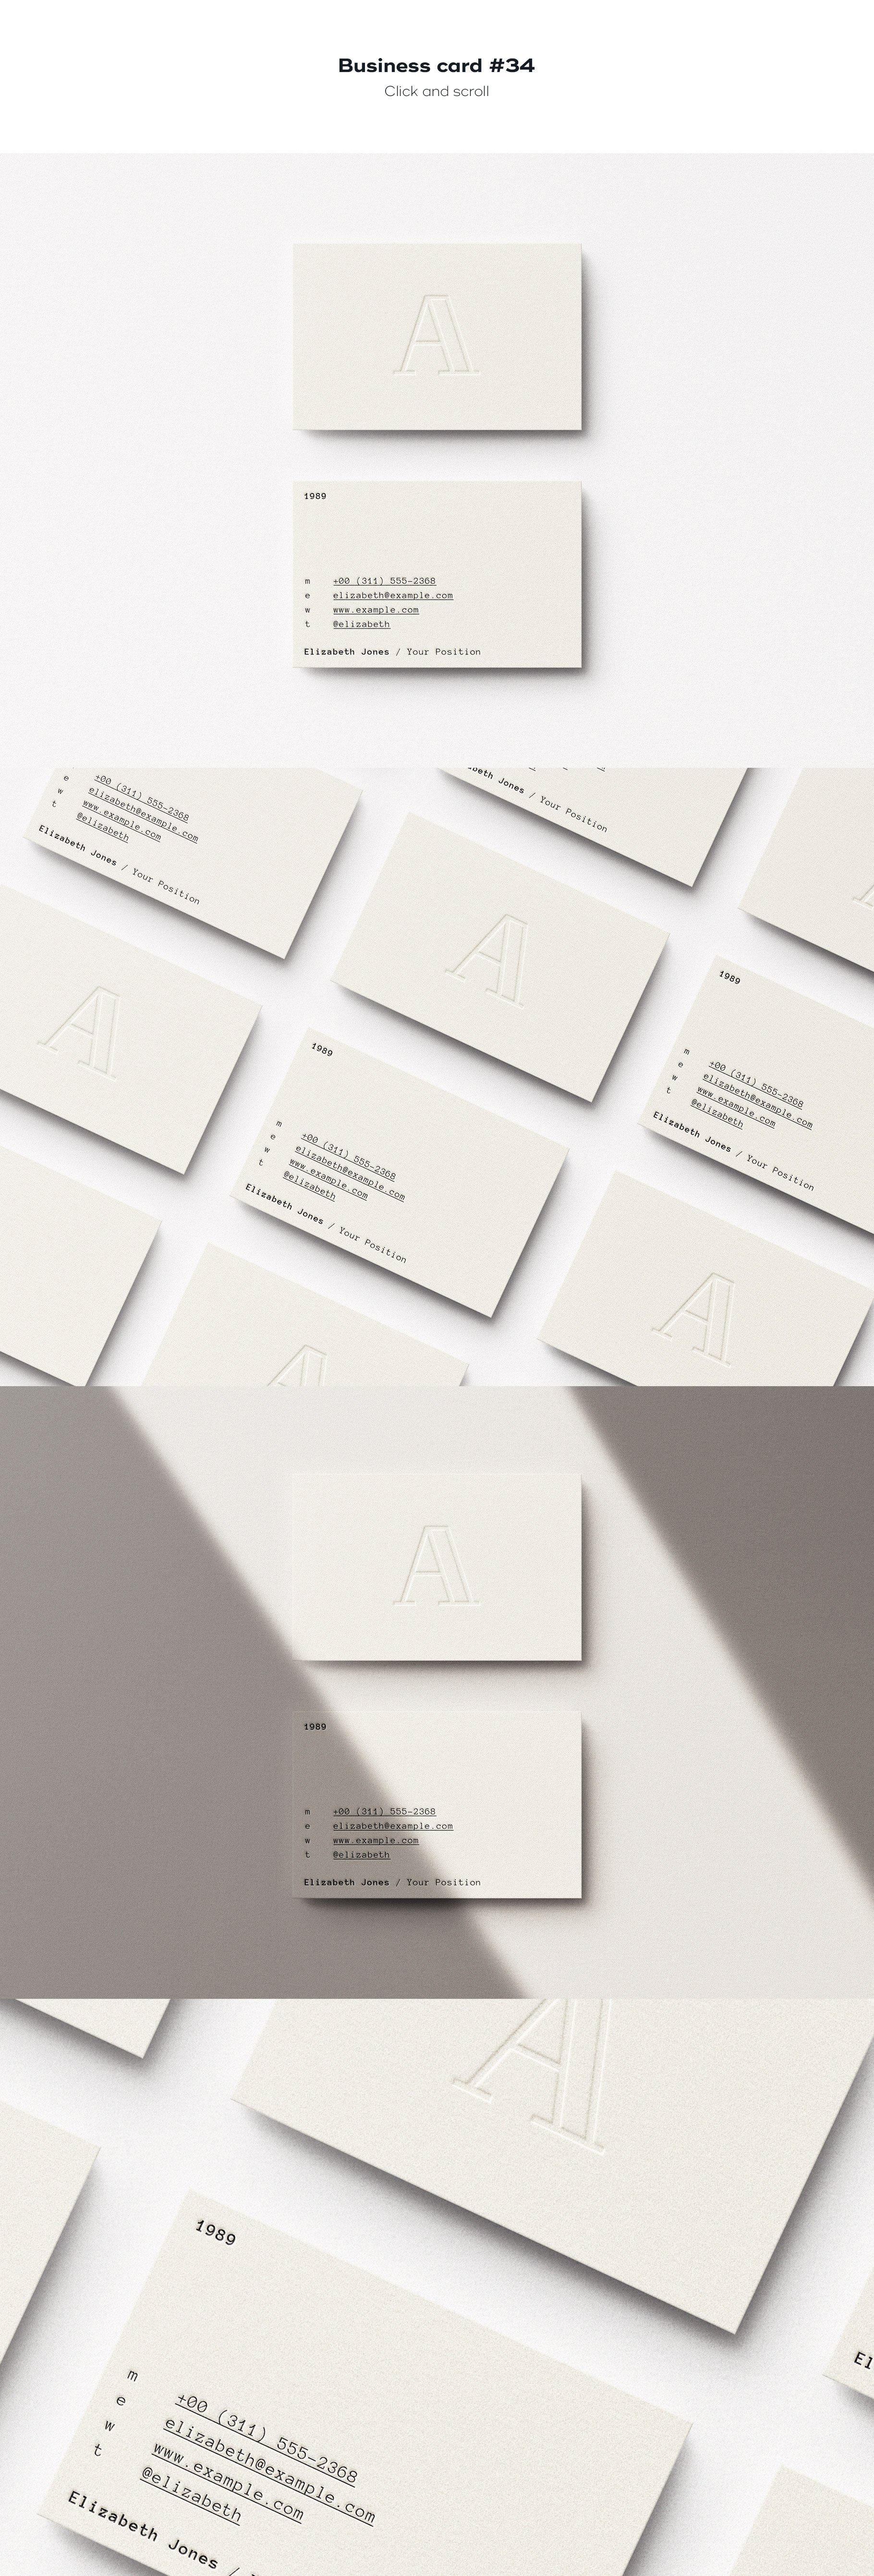 business card 34 577